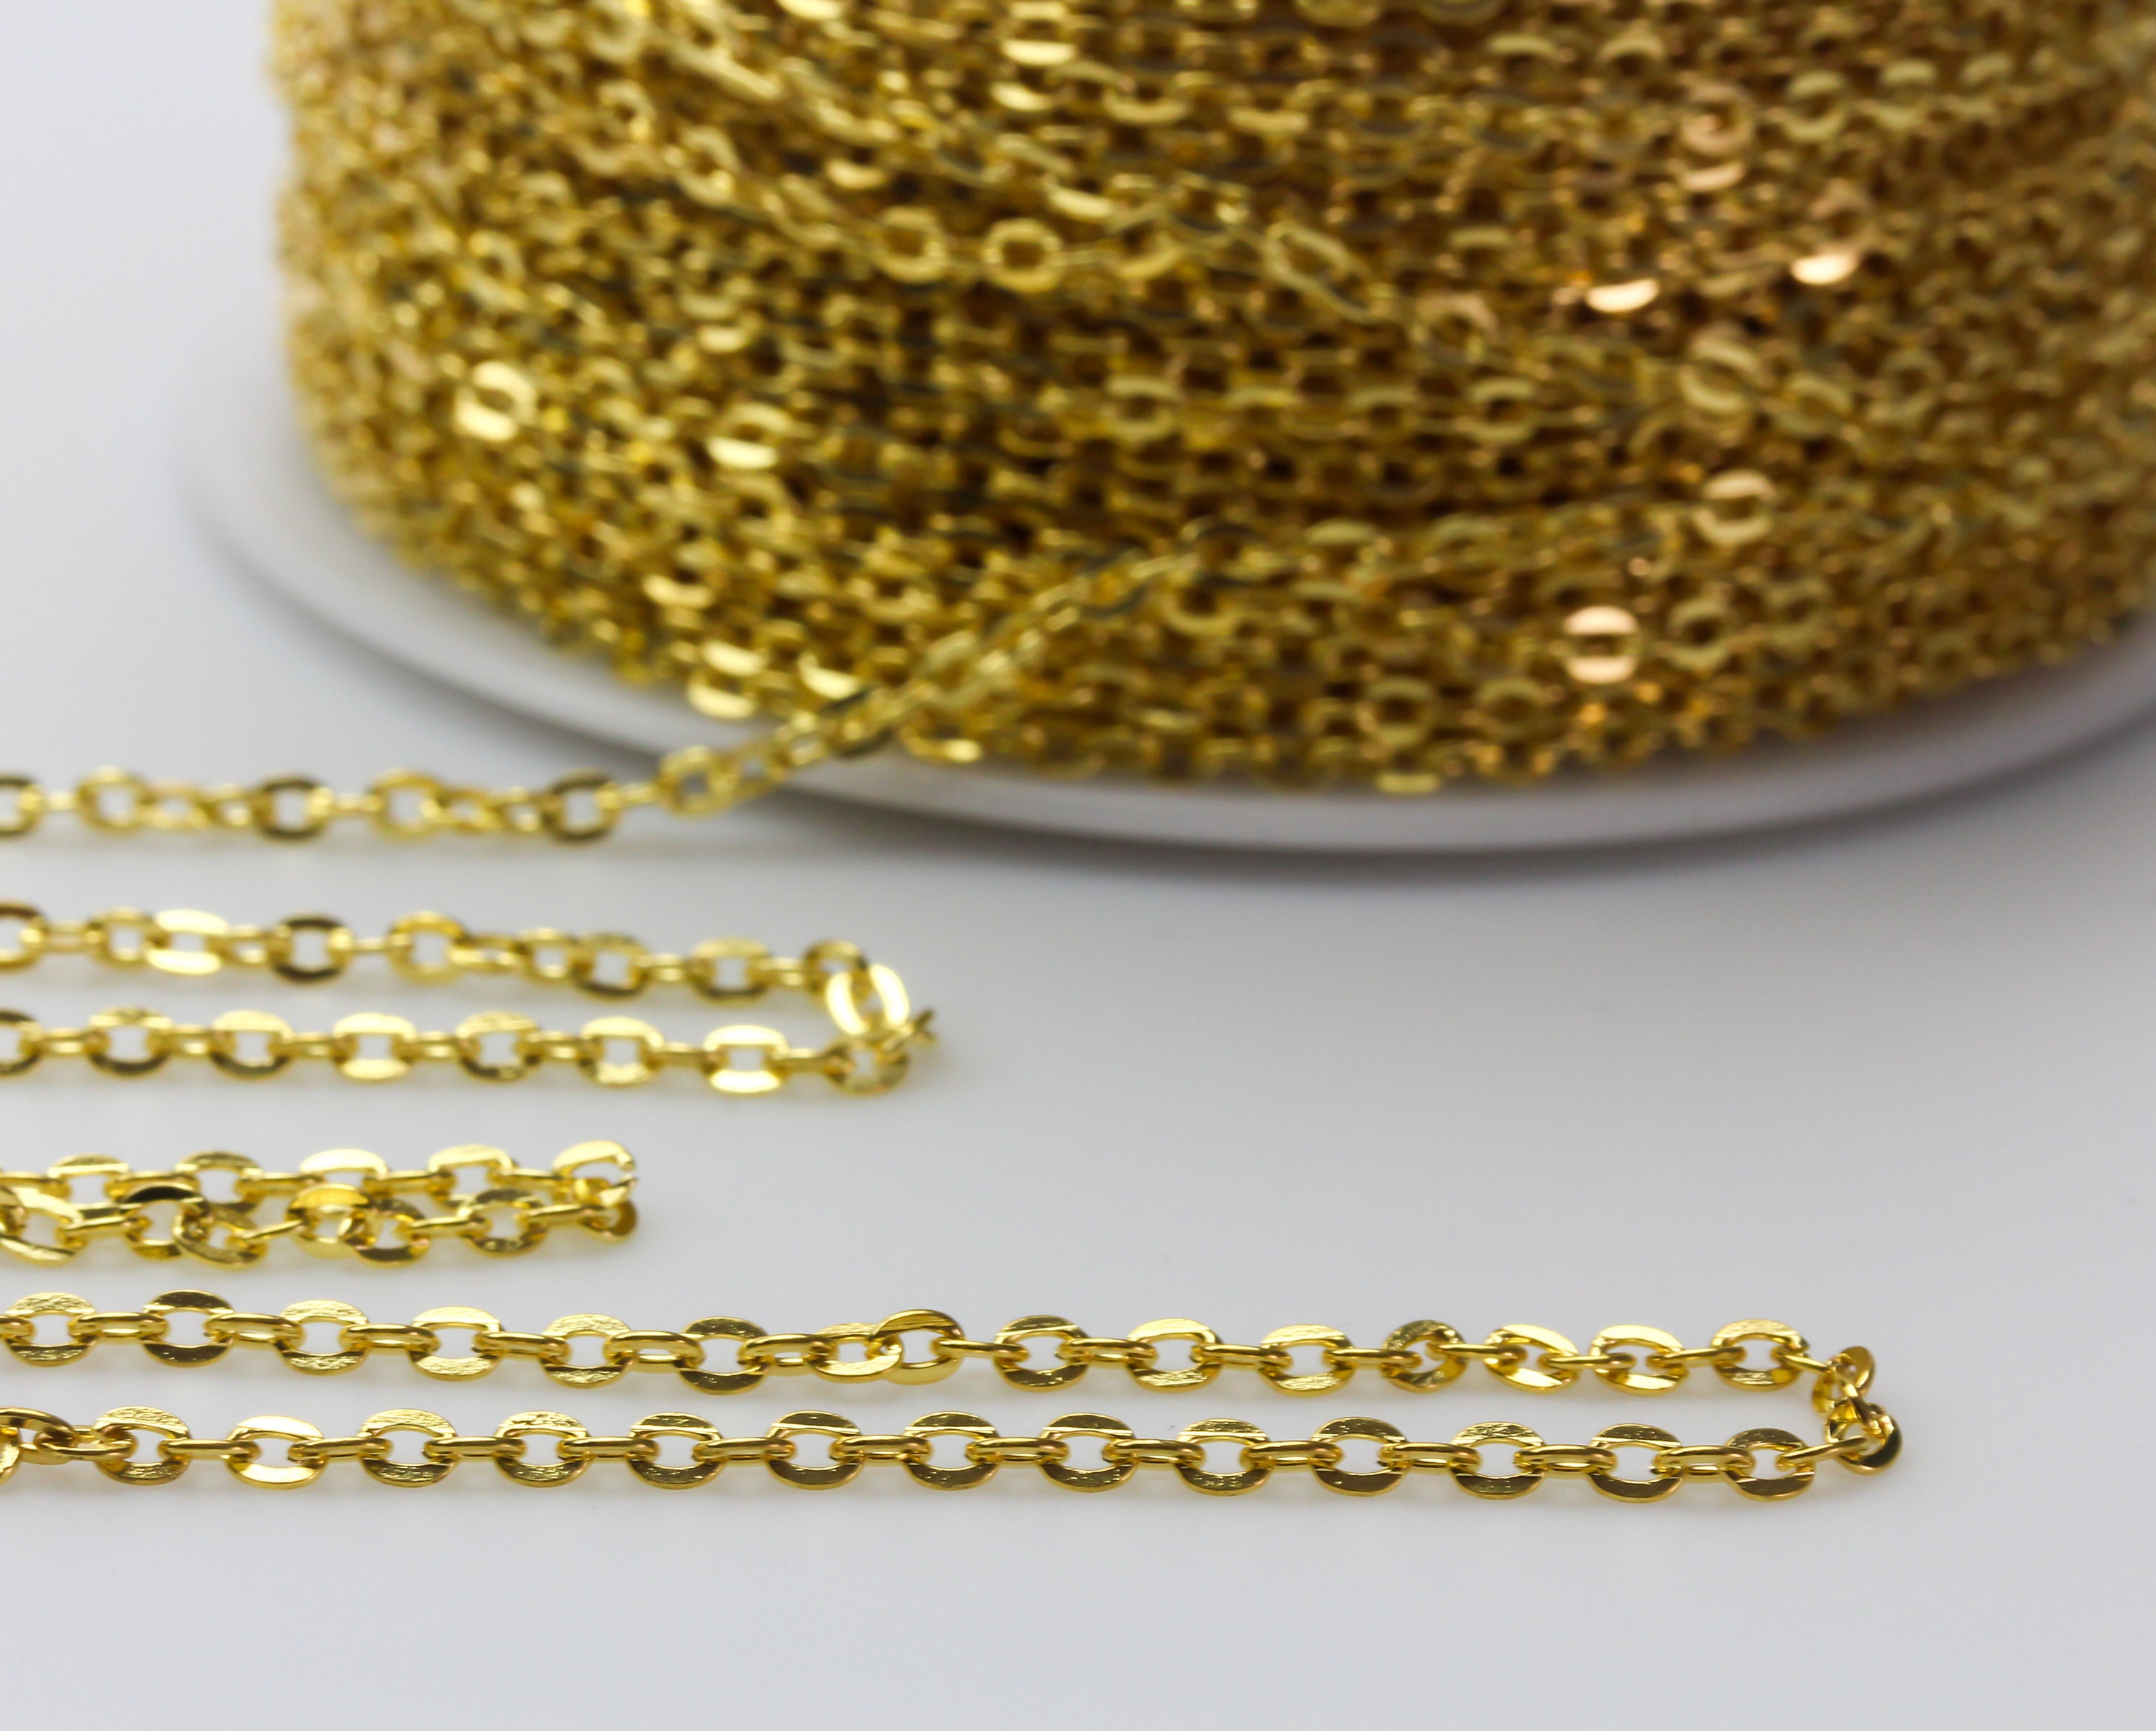 12mm Golden Plated Purse Chain, Purse Strap, Curb Chain, Wheat Chain, Cable  Chain, Chain Strap, Bag Chain, Wallet Chain, Replacement Chains